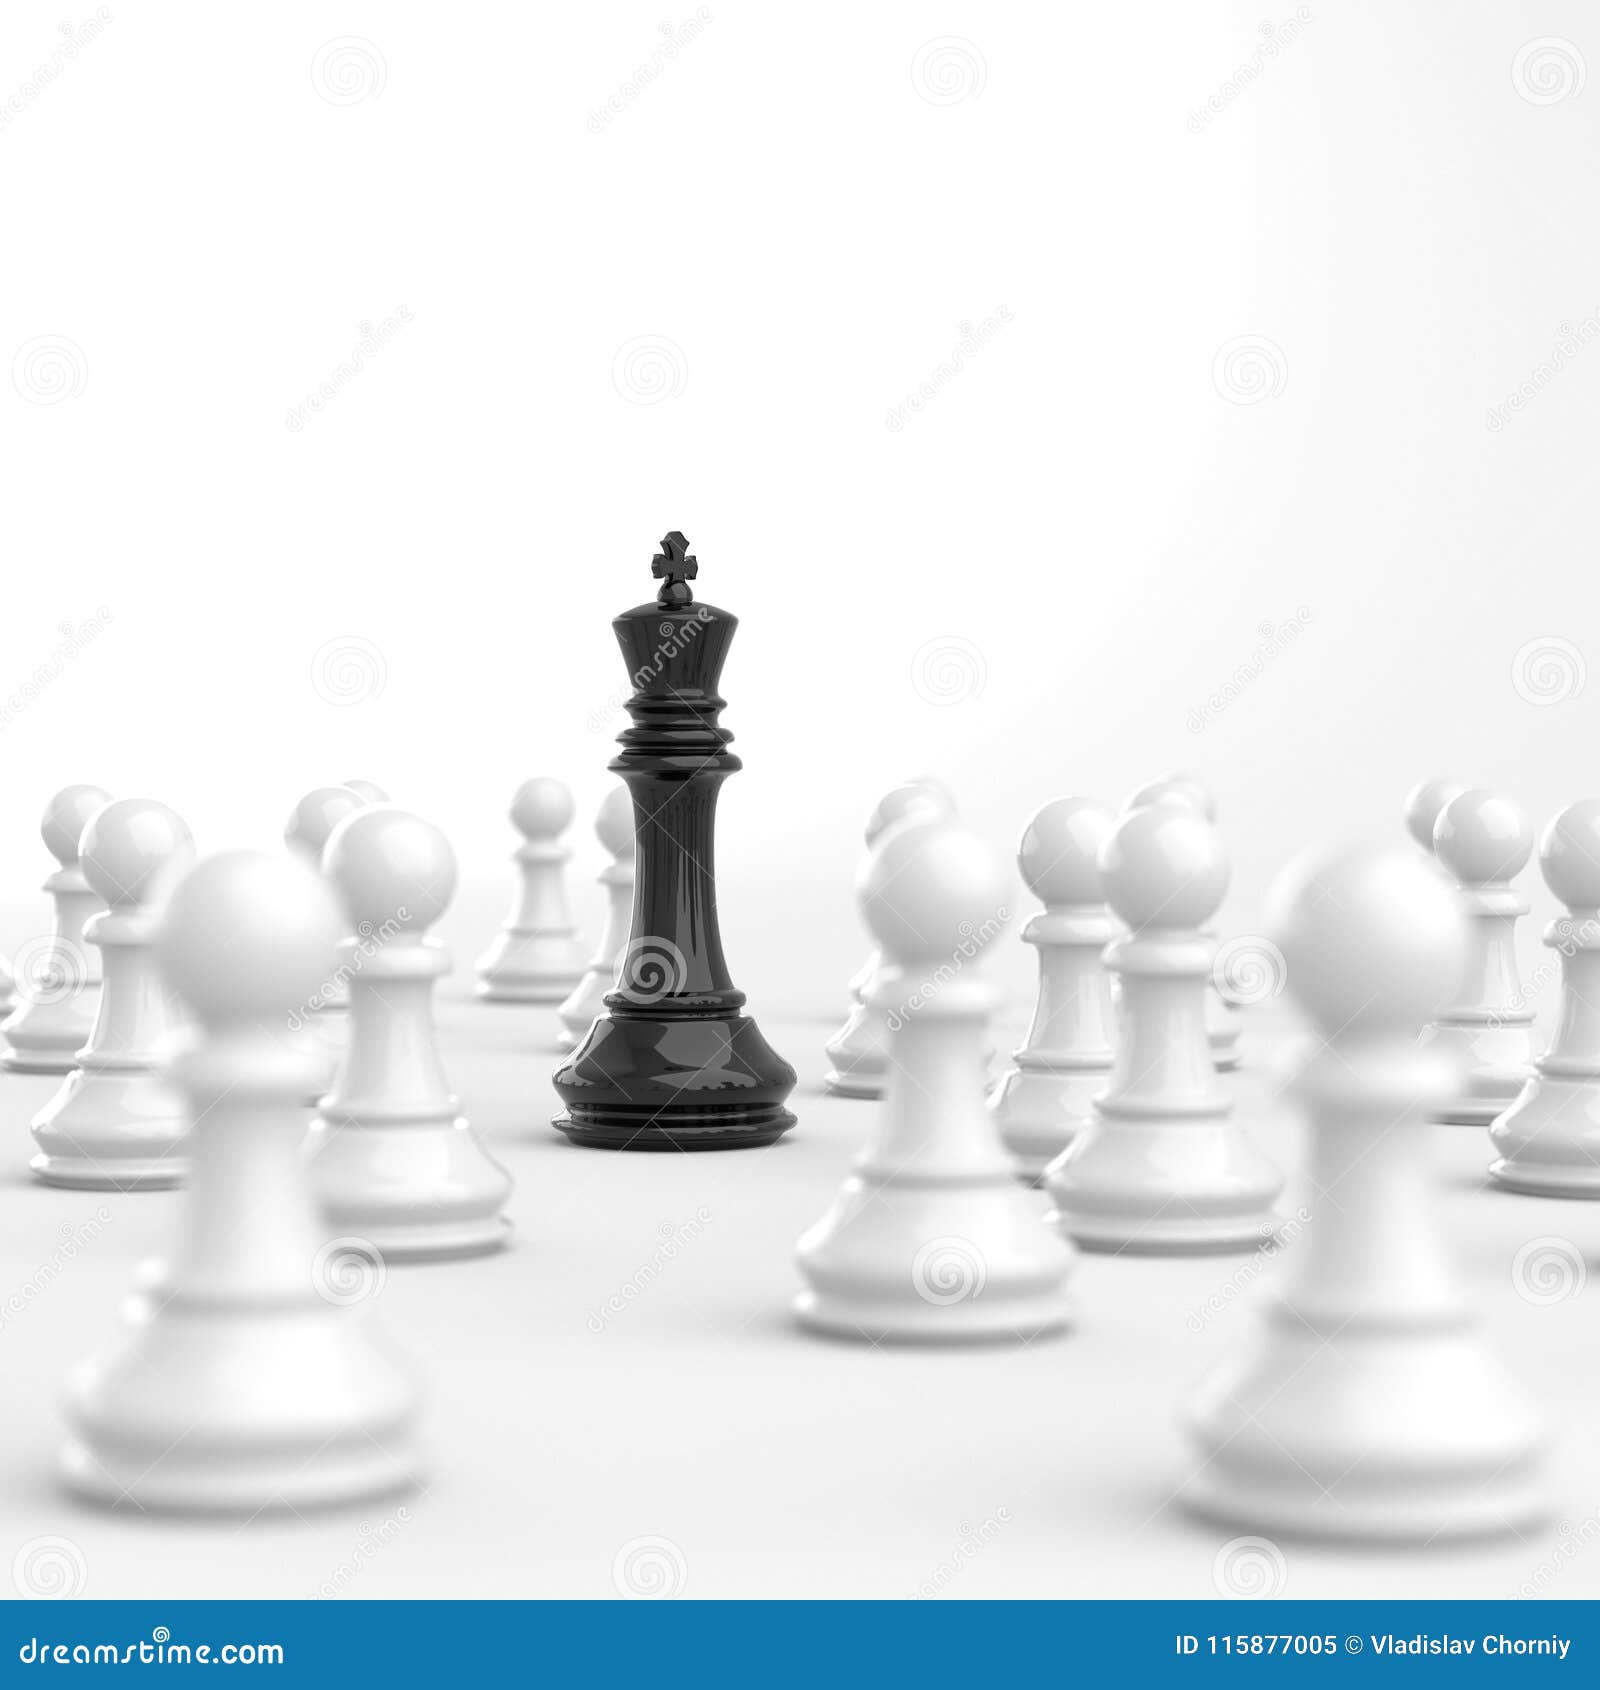 Black king of chess stock illustration. Illustration of pieces - 115877005